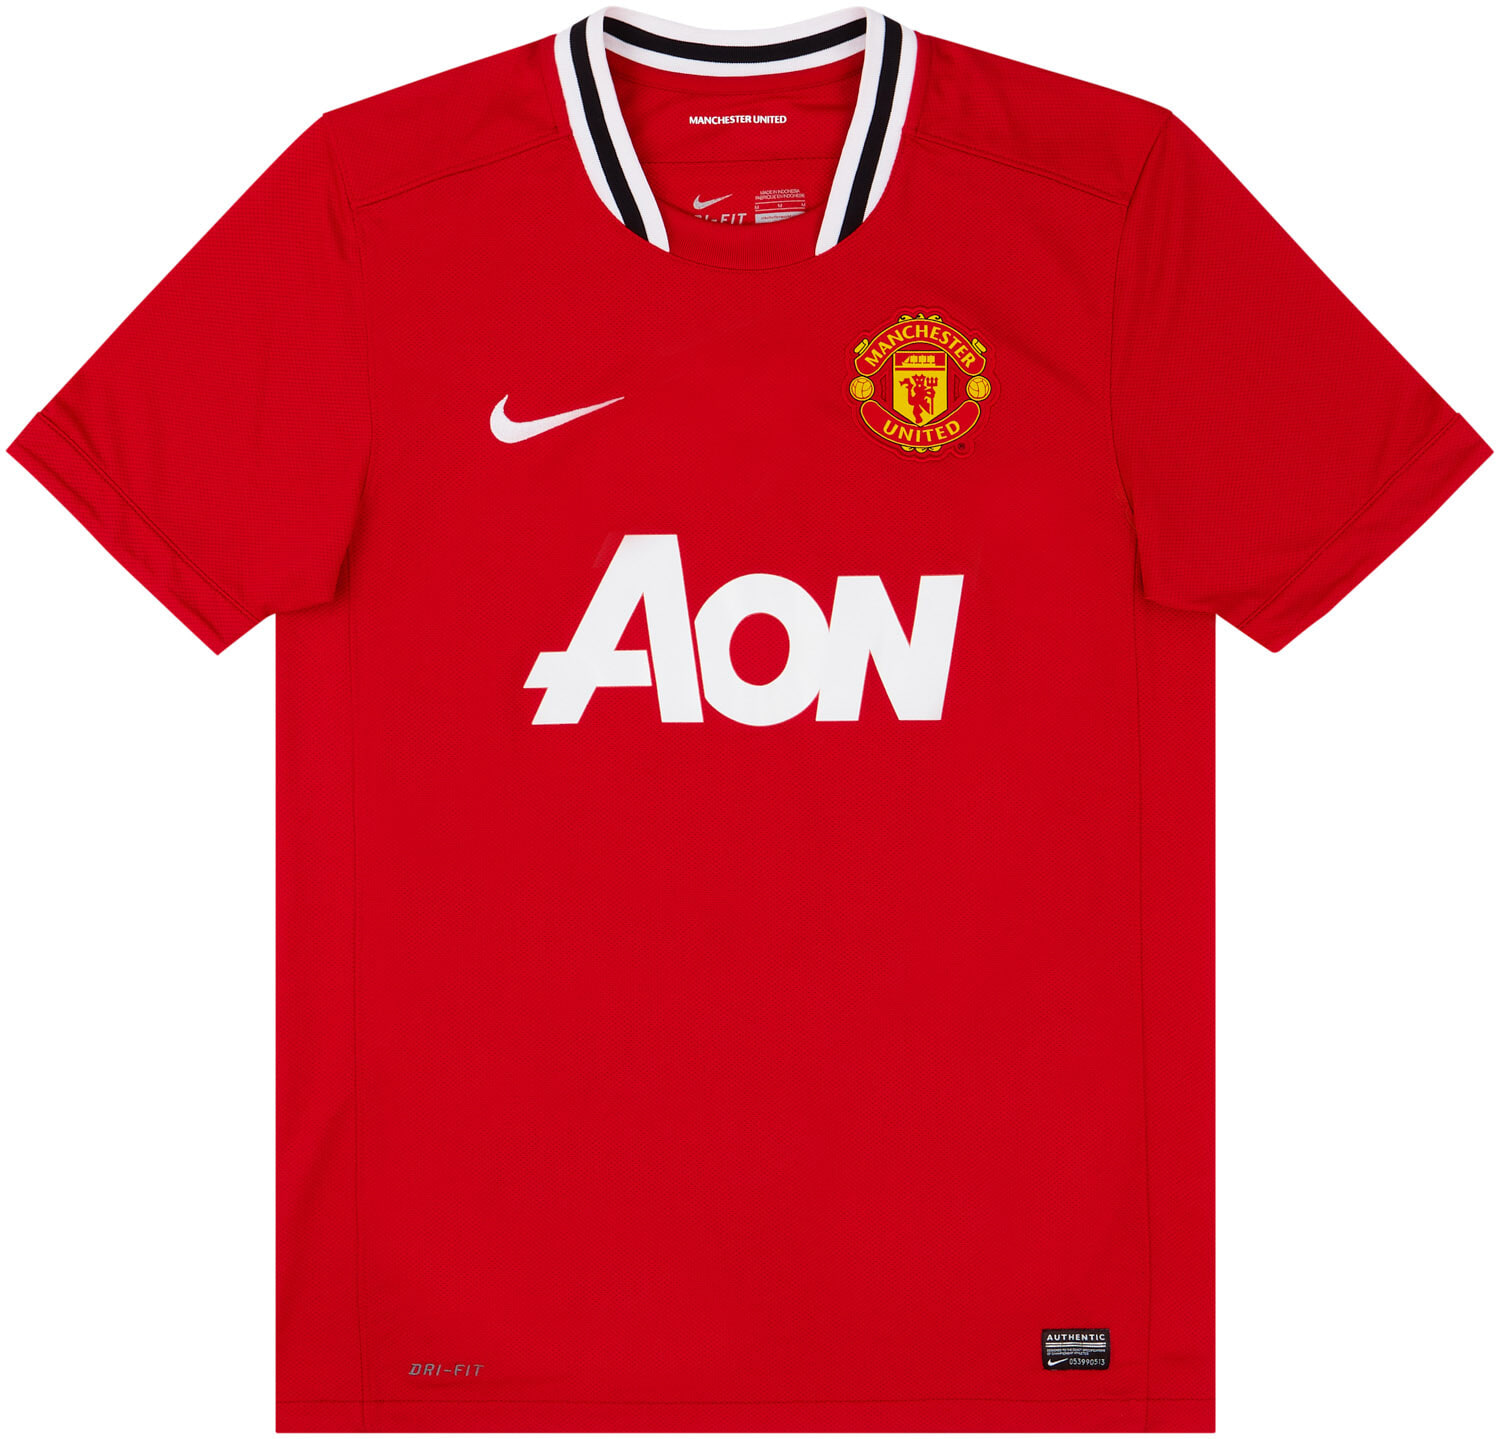 2011-12 Manchester United Home Shirt - 6/10 - ()